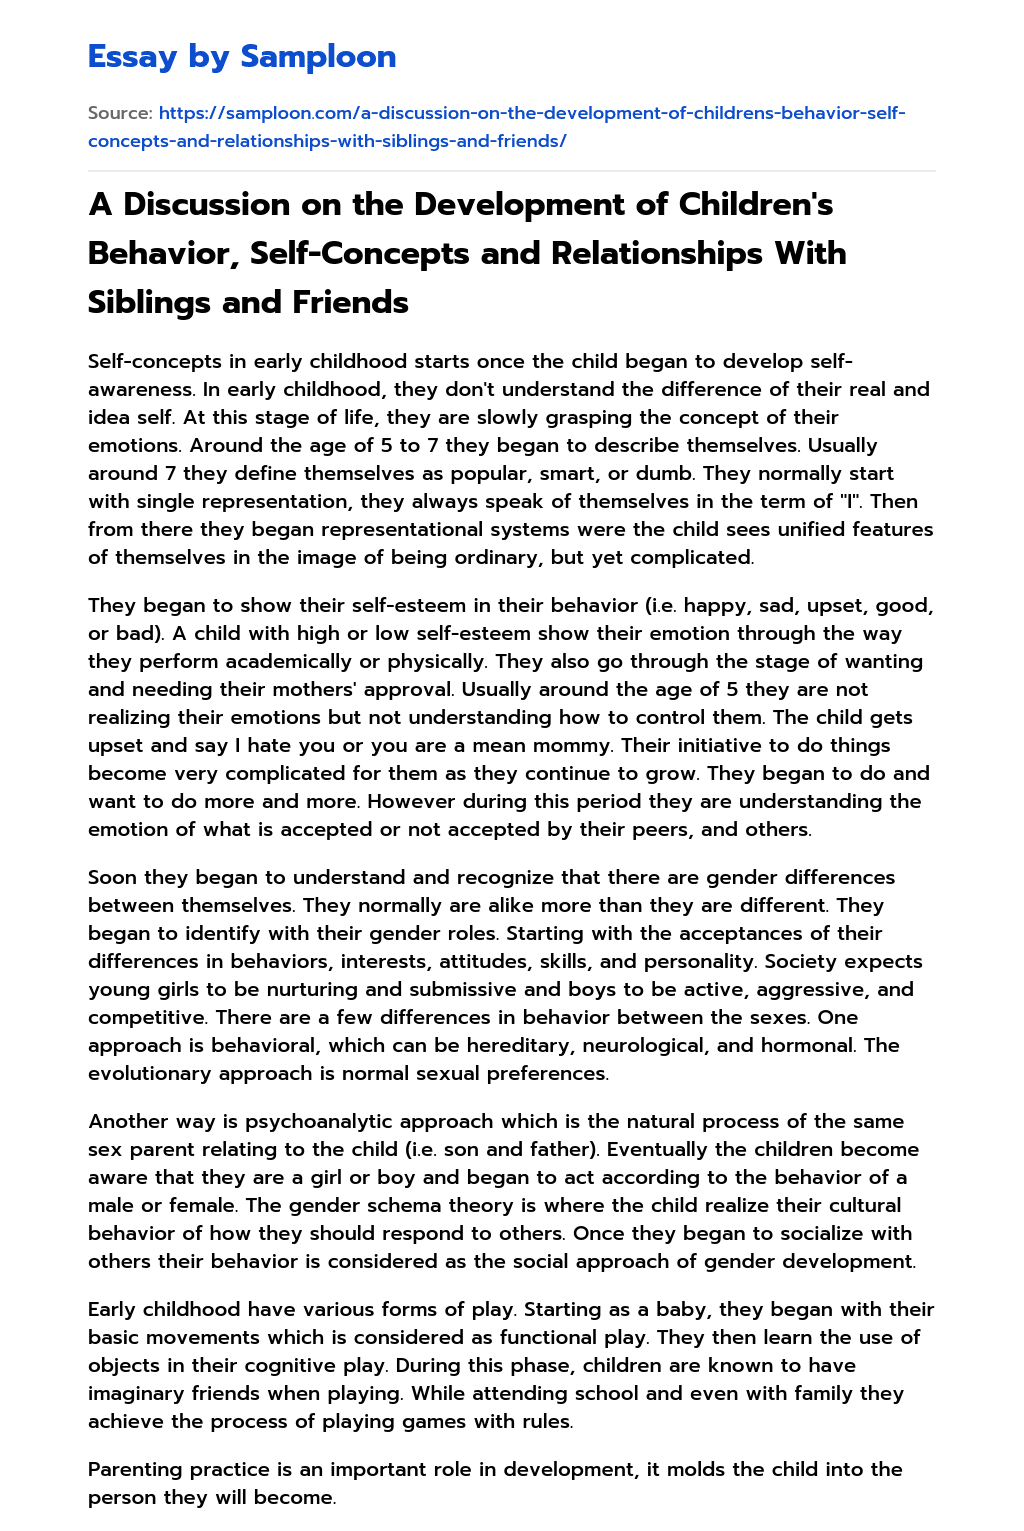 A Discussion on the Development of Children’s Behavior, Self-Concepts and Relationships With Siblings and Friends essay